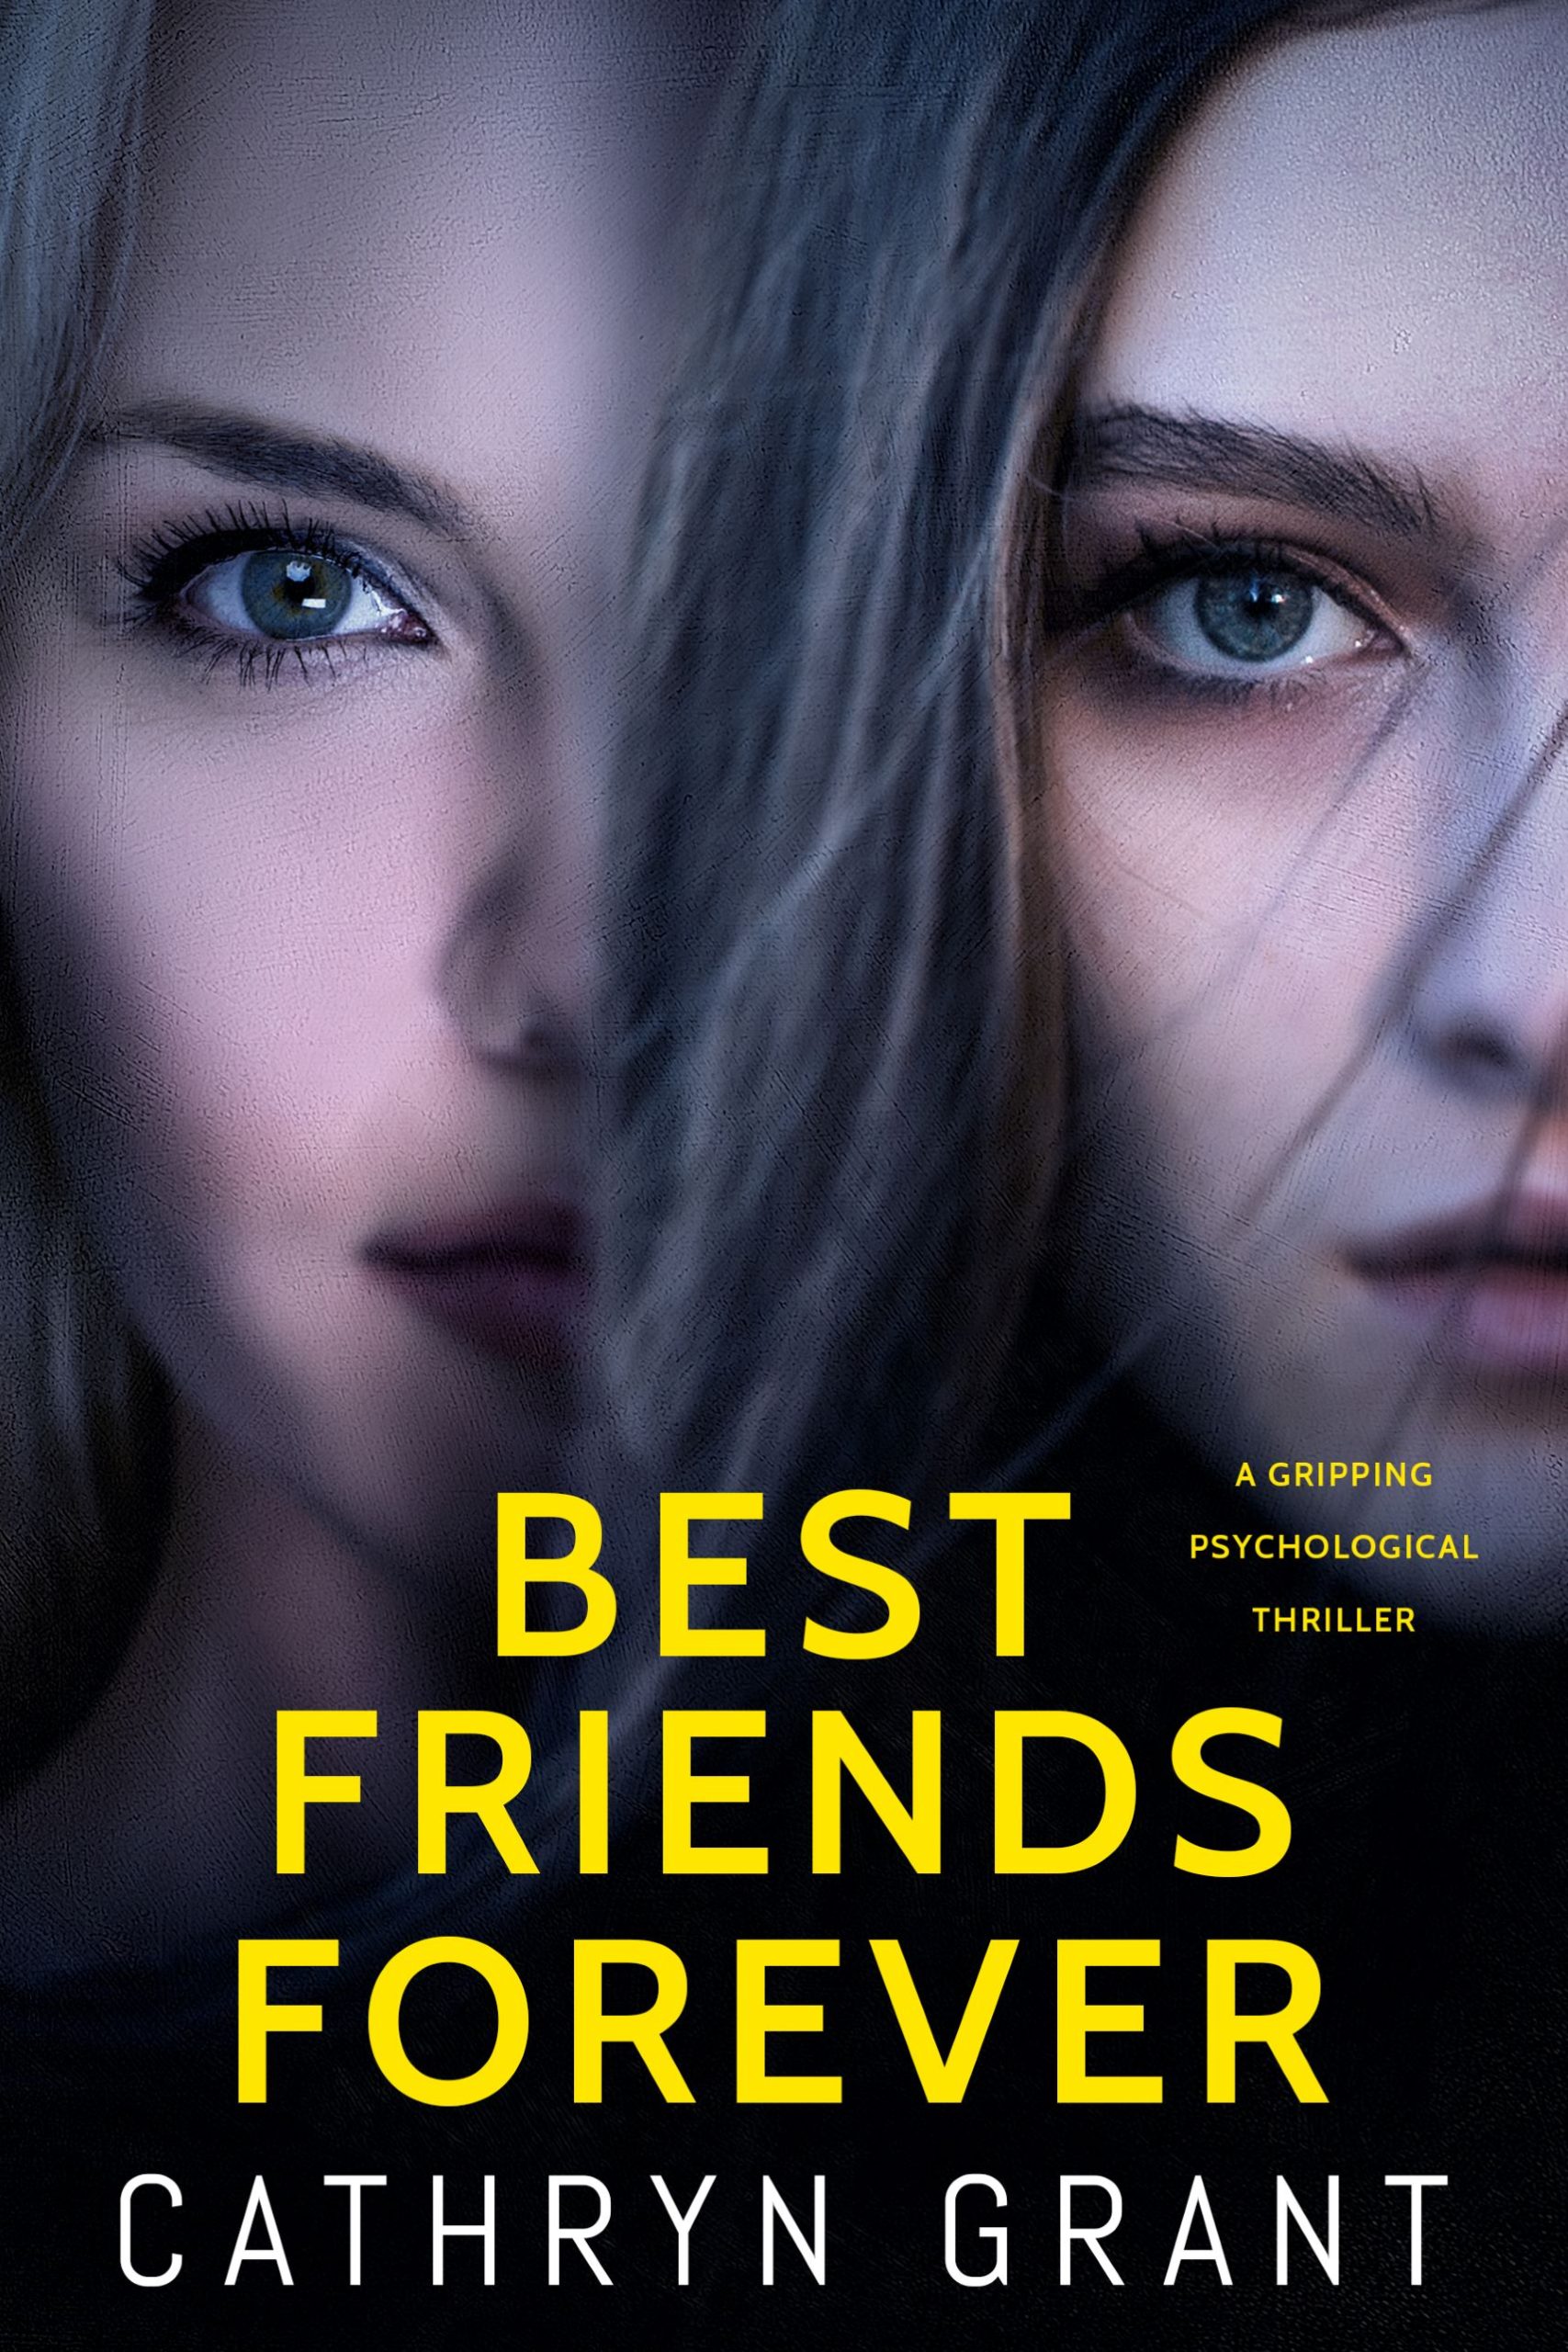 CATHRYN GRANT NEW RELEASE – BEST FRIENDS FOREVER